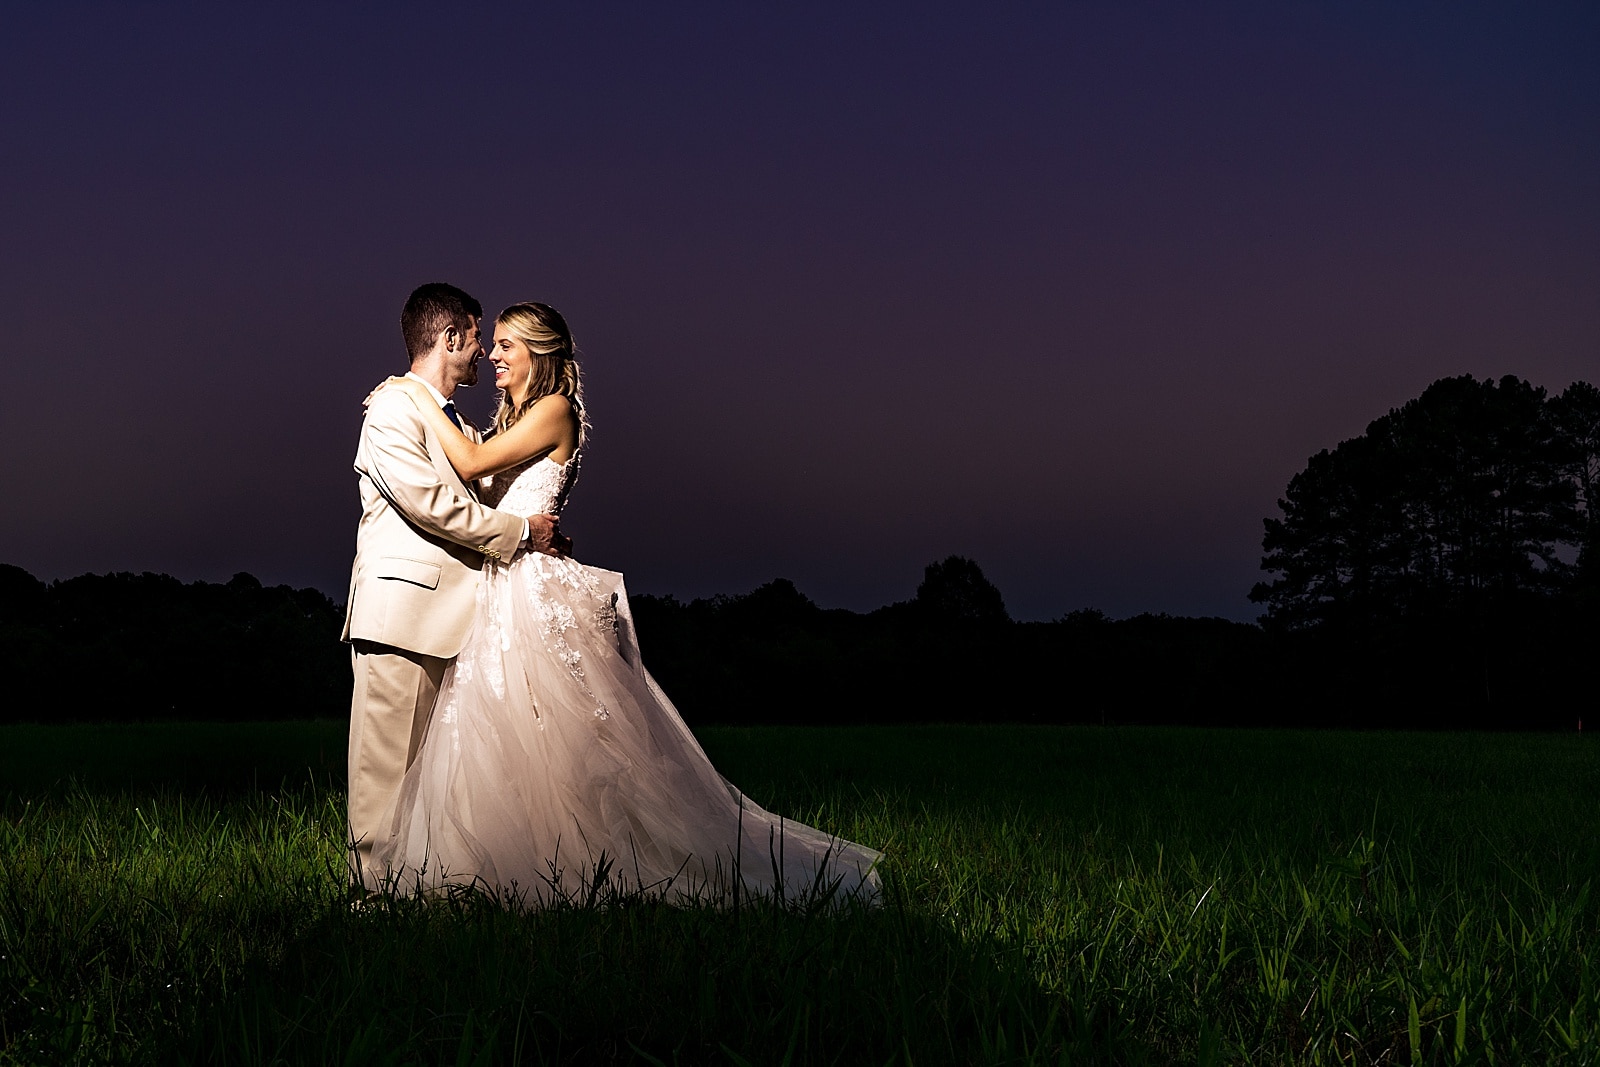 blue hour is a must on your wedding day